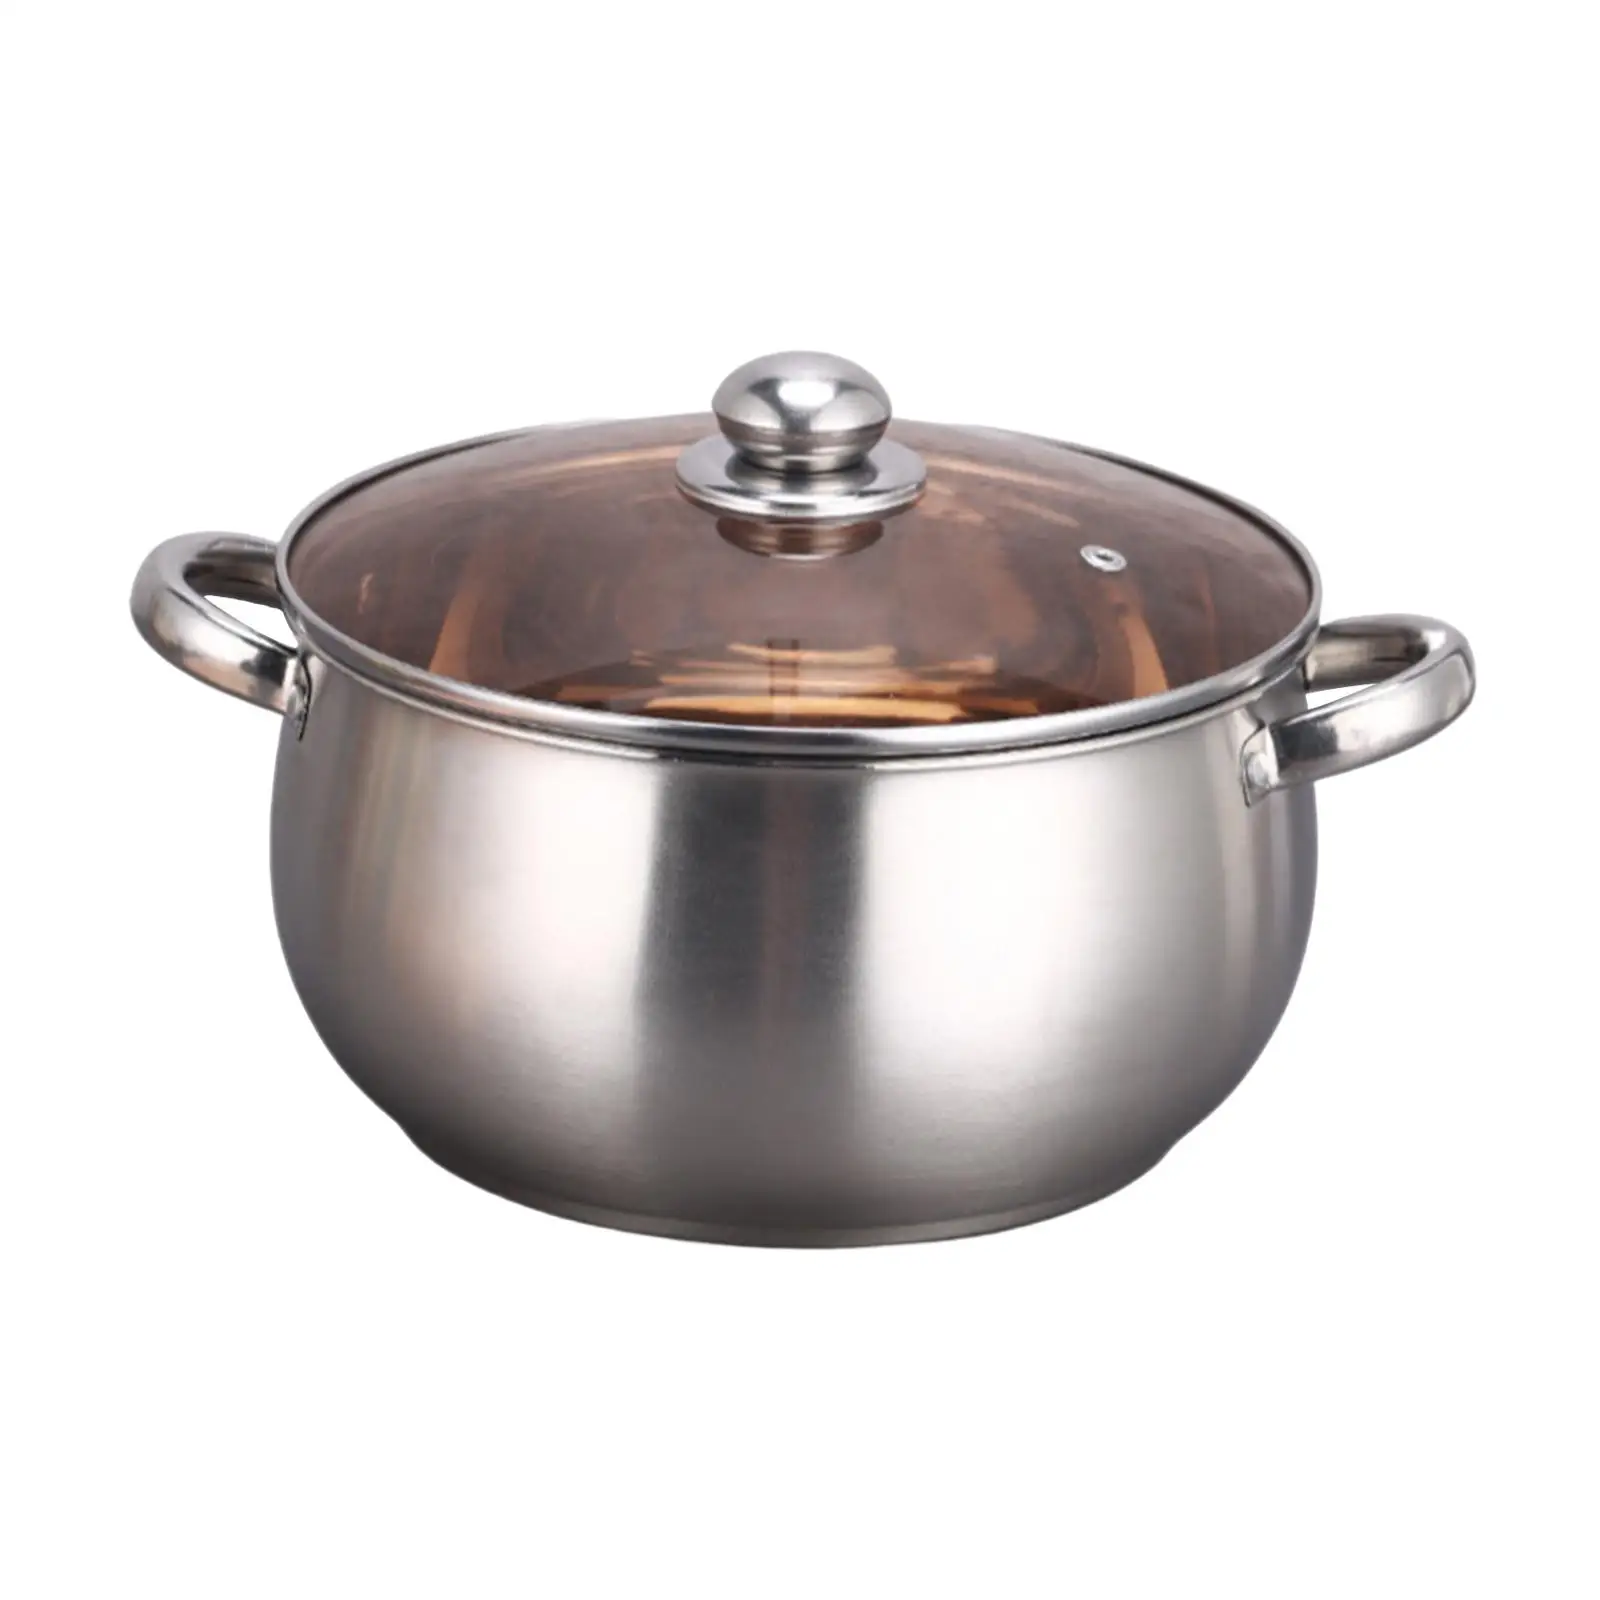 Stainless Steel Stockpot with Lid Pasta Soup Pot Easy to Clean Small Saucepan for Cooking Eggs Warming Milk Vegetables Soup